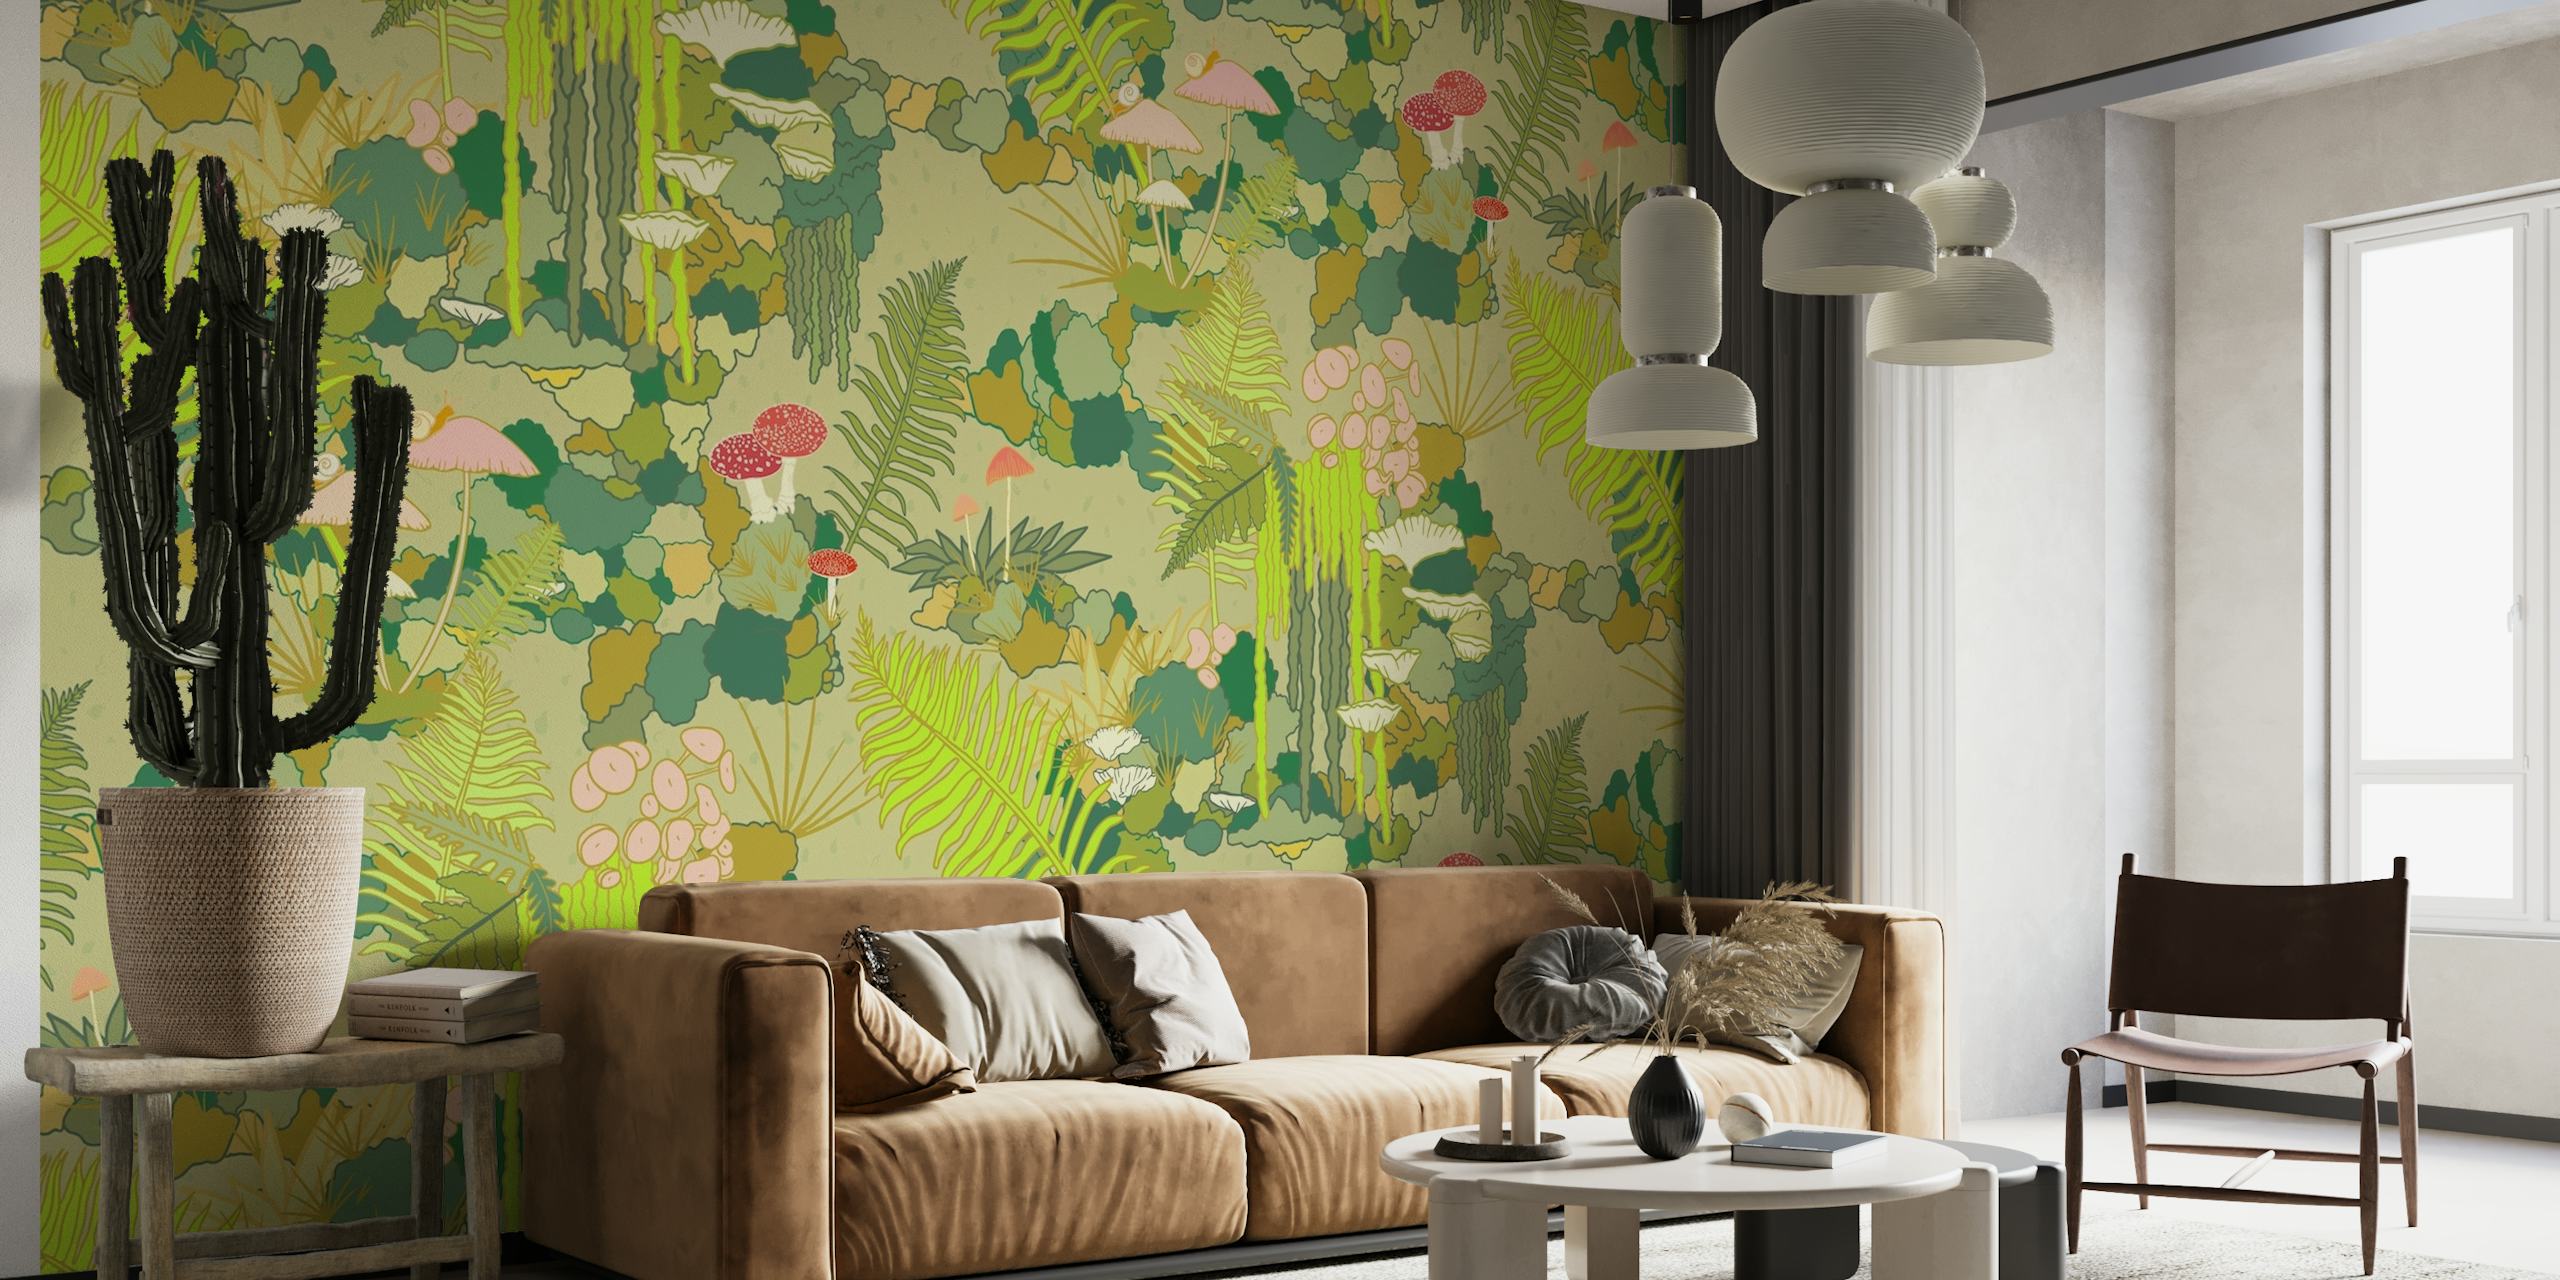 Mossy Forest Floor wall mural depicting a rich pattern of foliage and mushrooms